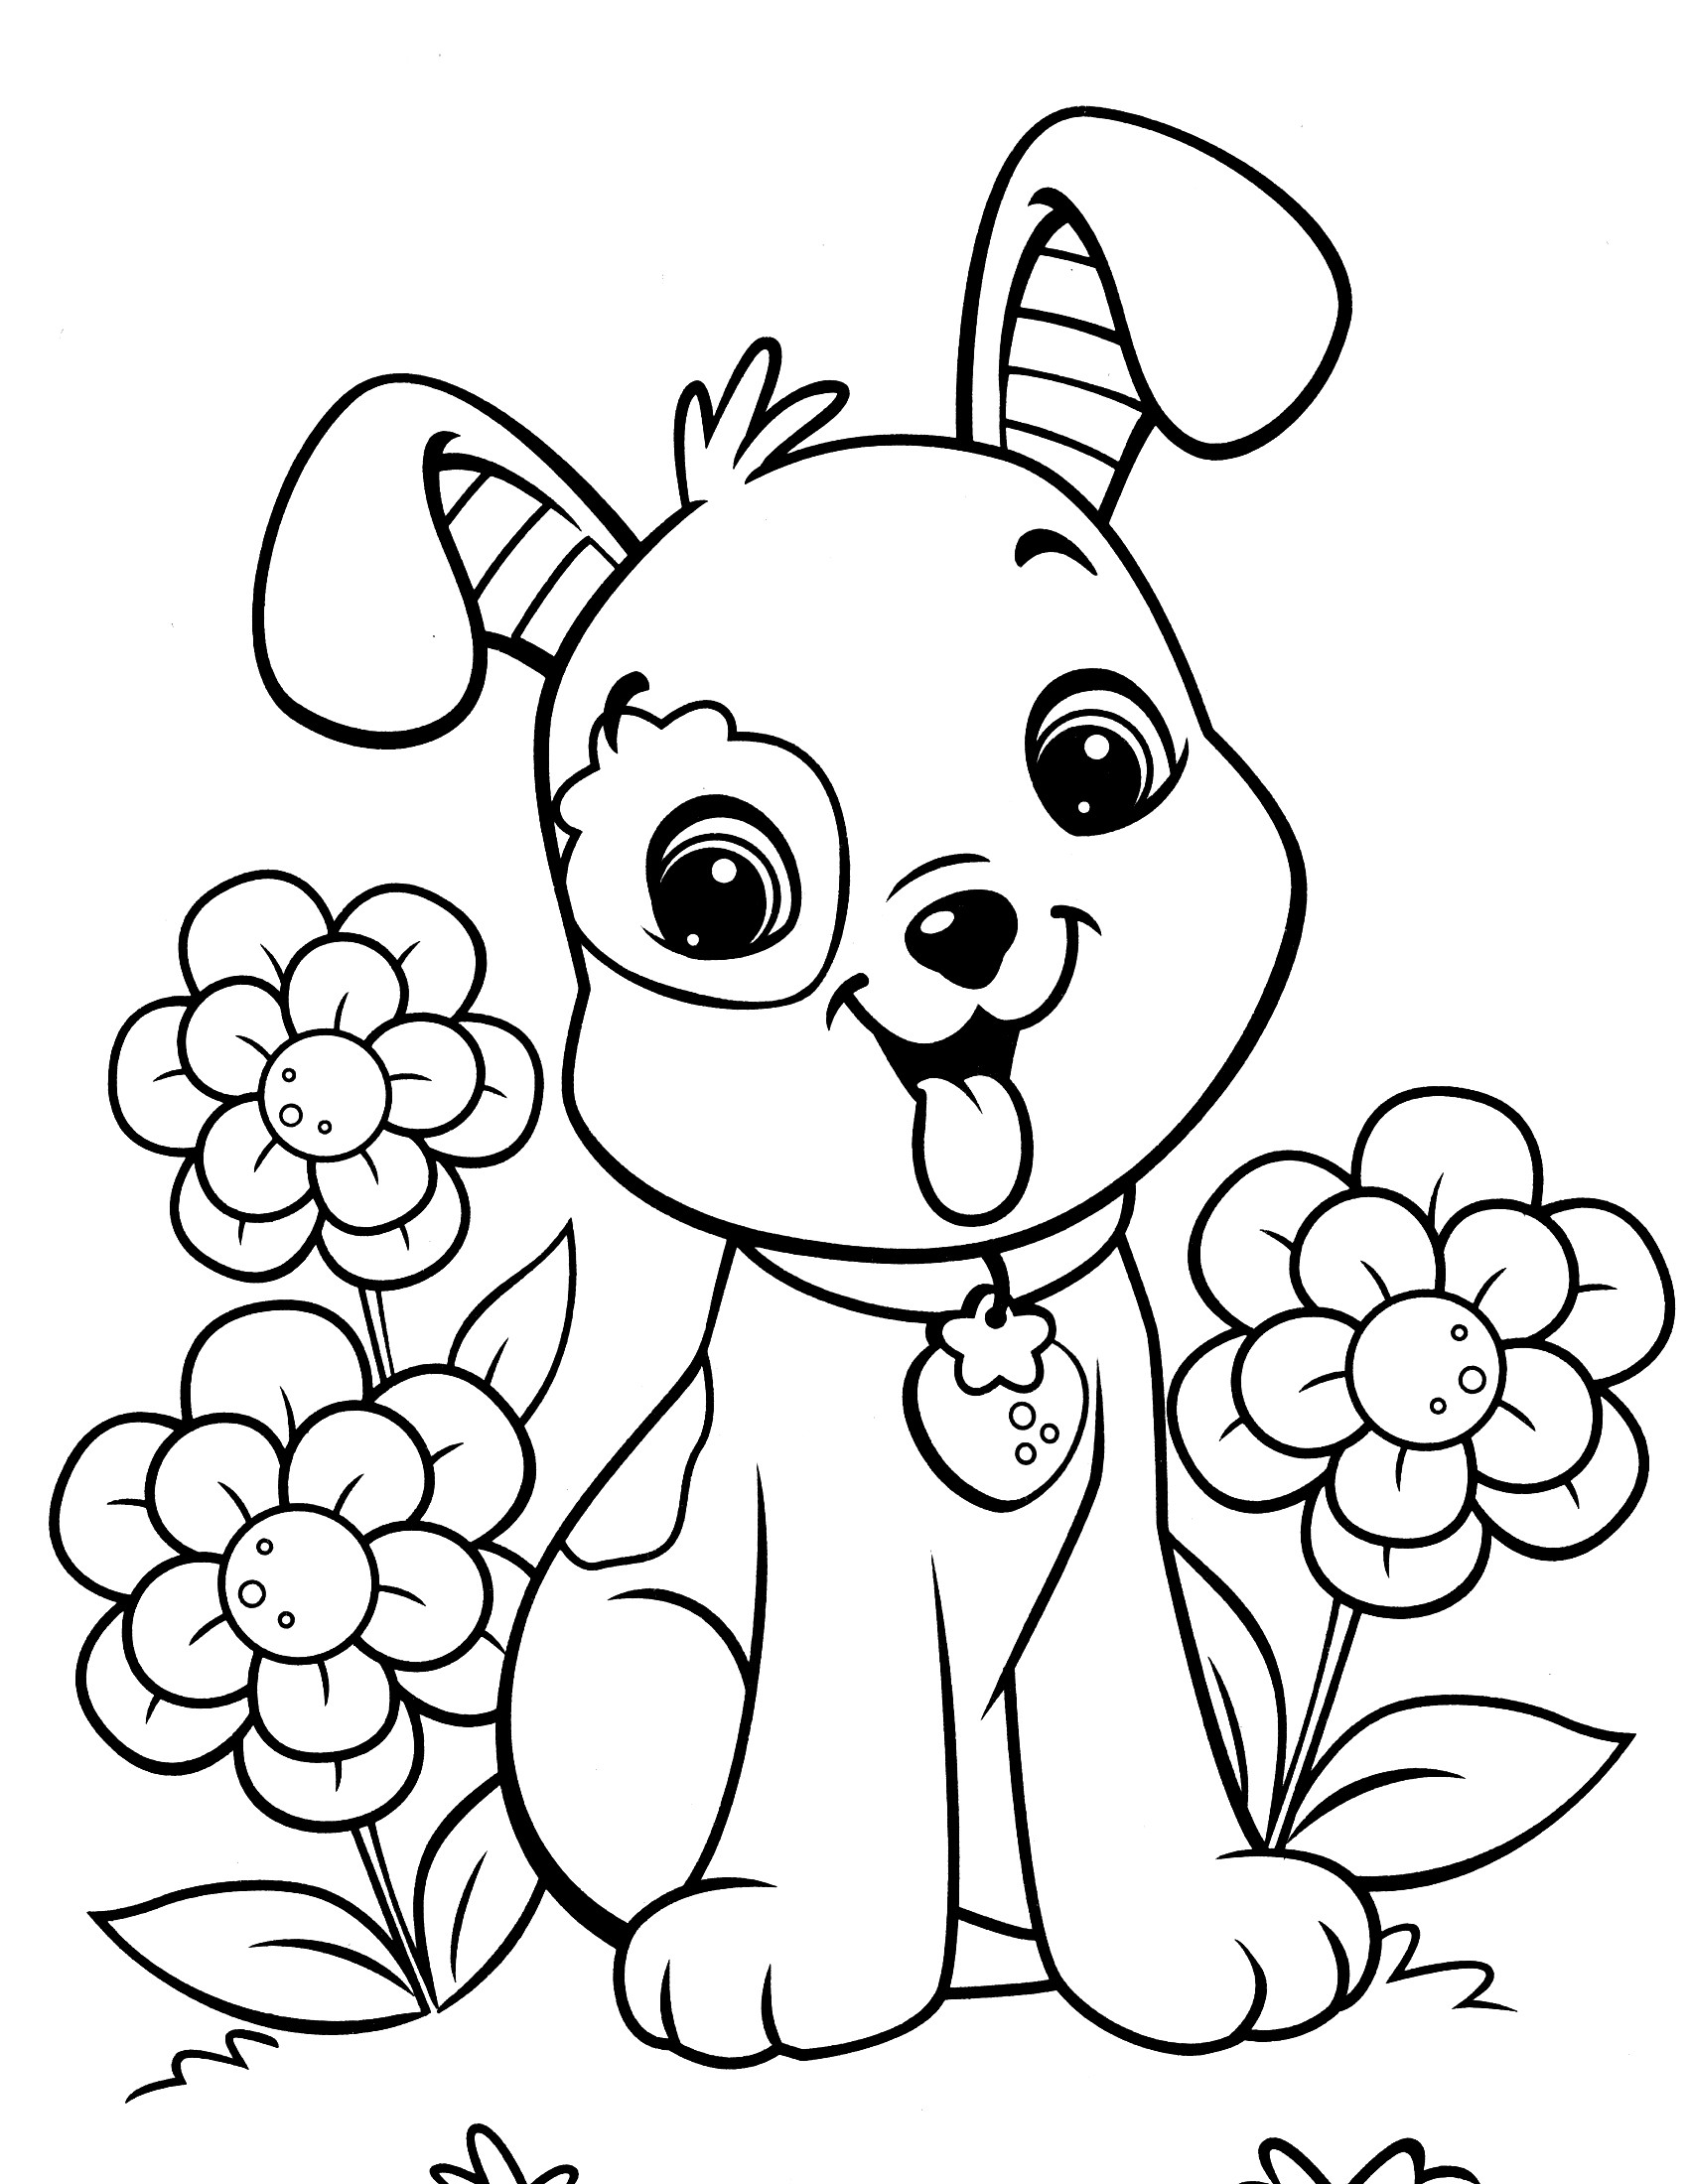 Coloring Sheets For Girls To Print Out
 Coloring Pages For Girls To Print Out Dog Pitchers Dogs